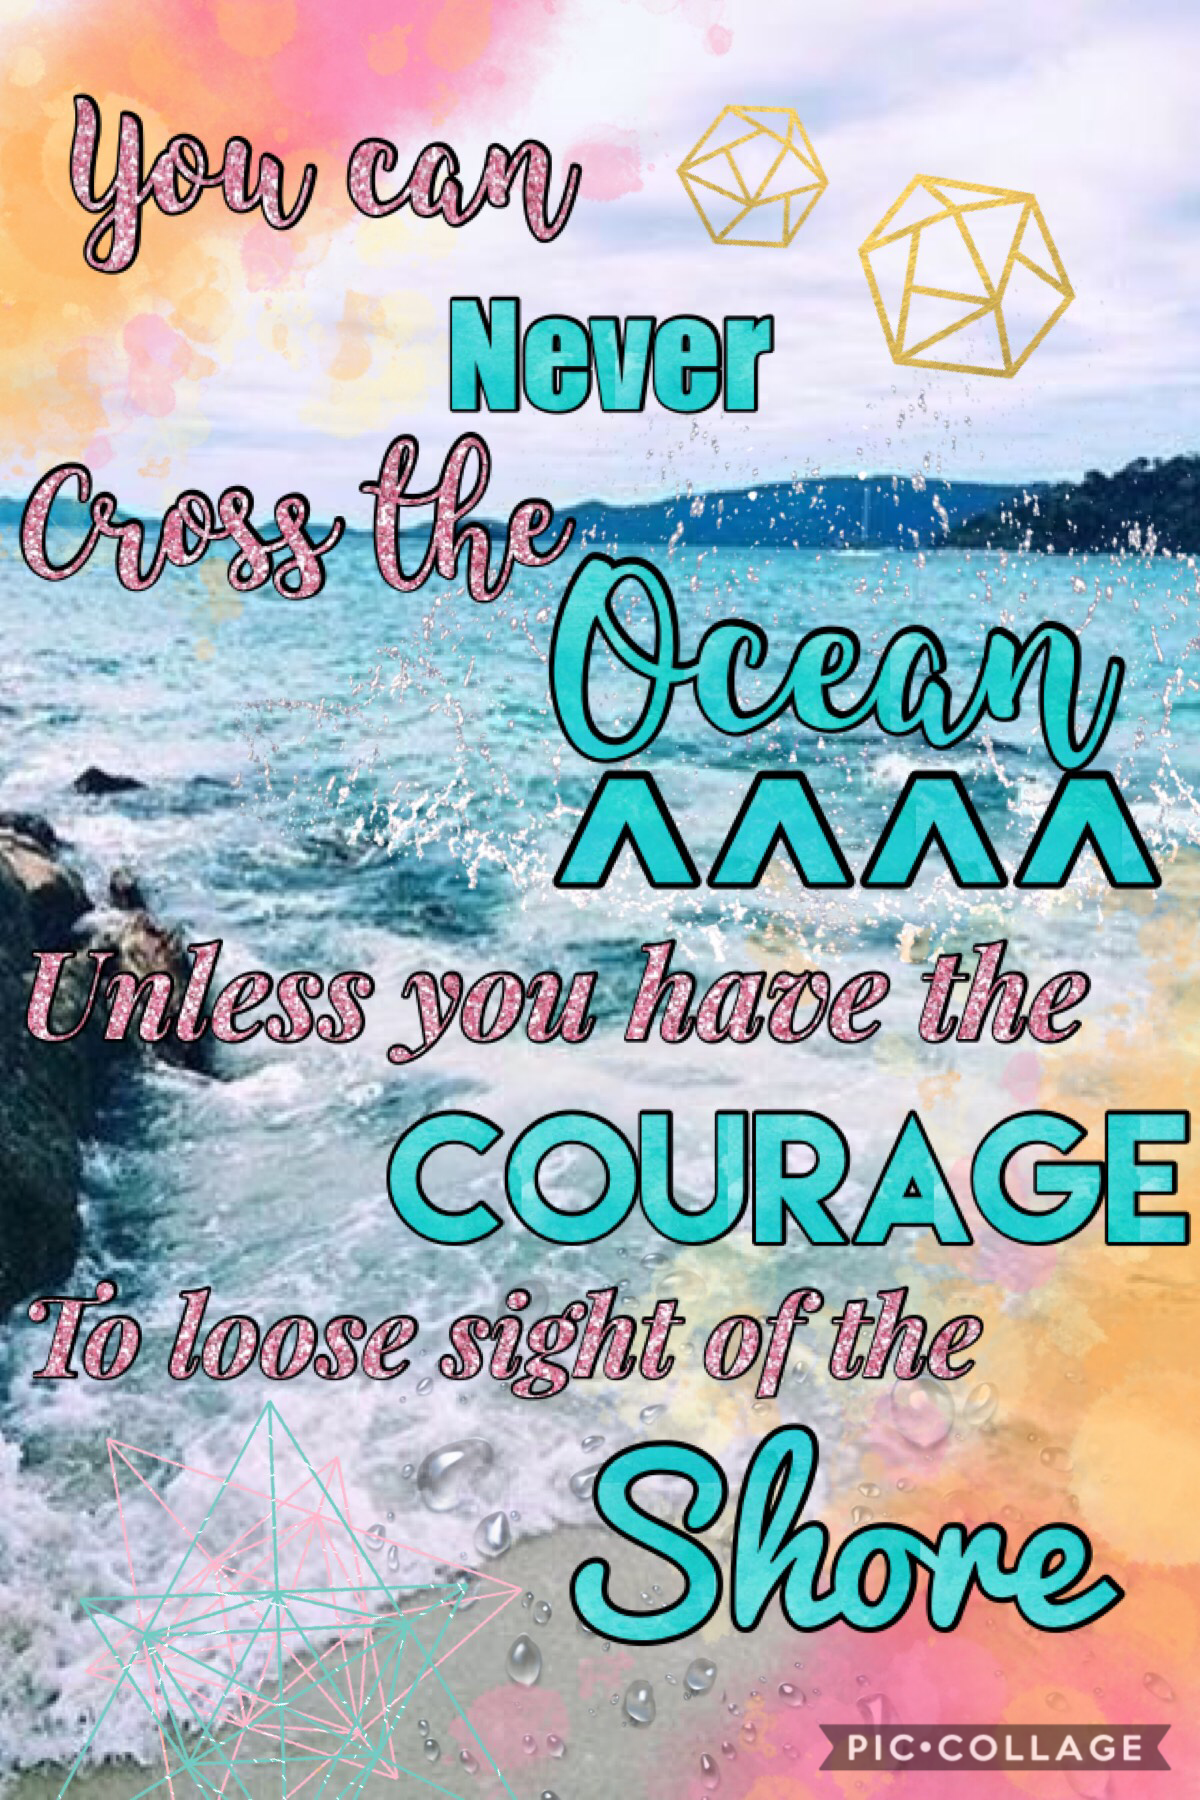 Hope you like it!! I really like this quote and I think it’s inspirational!